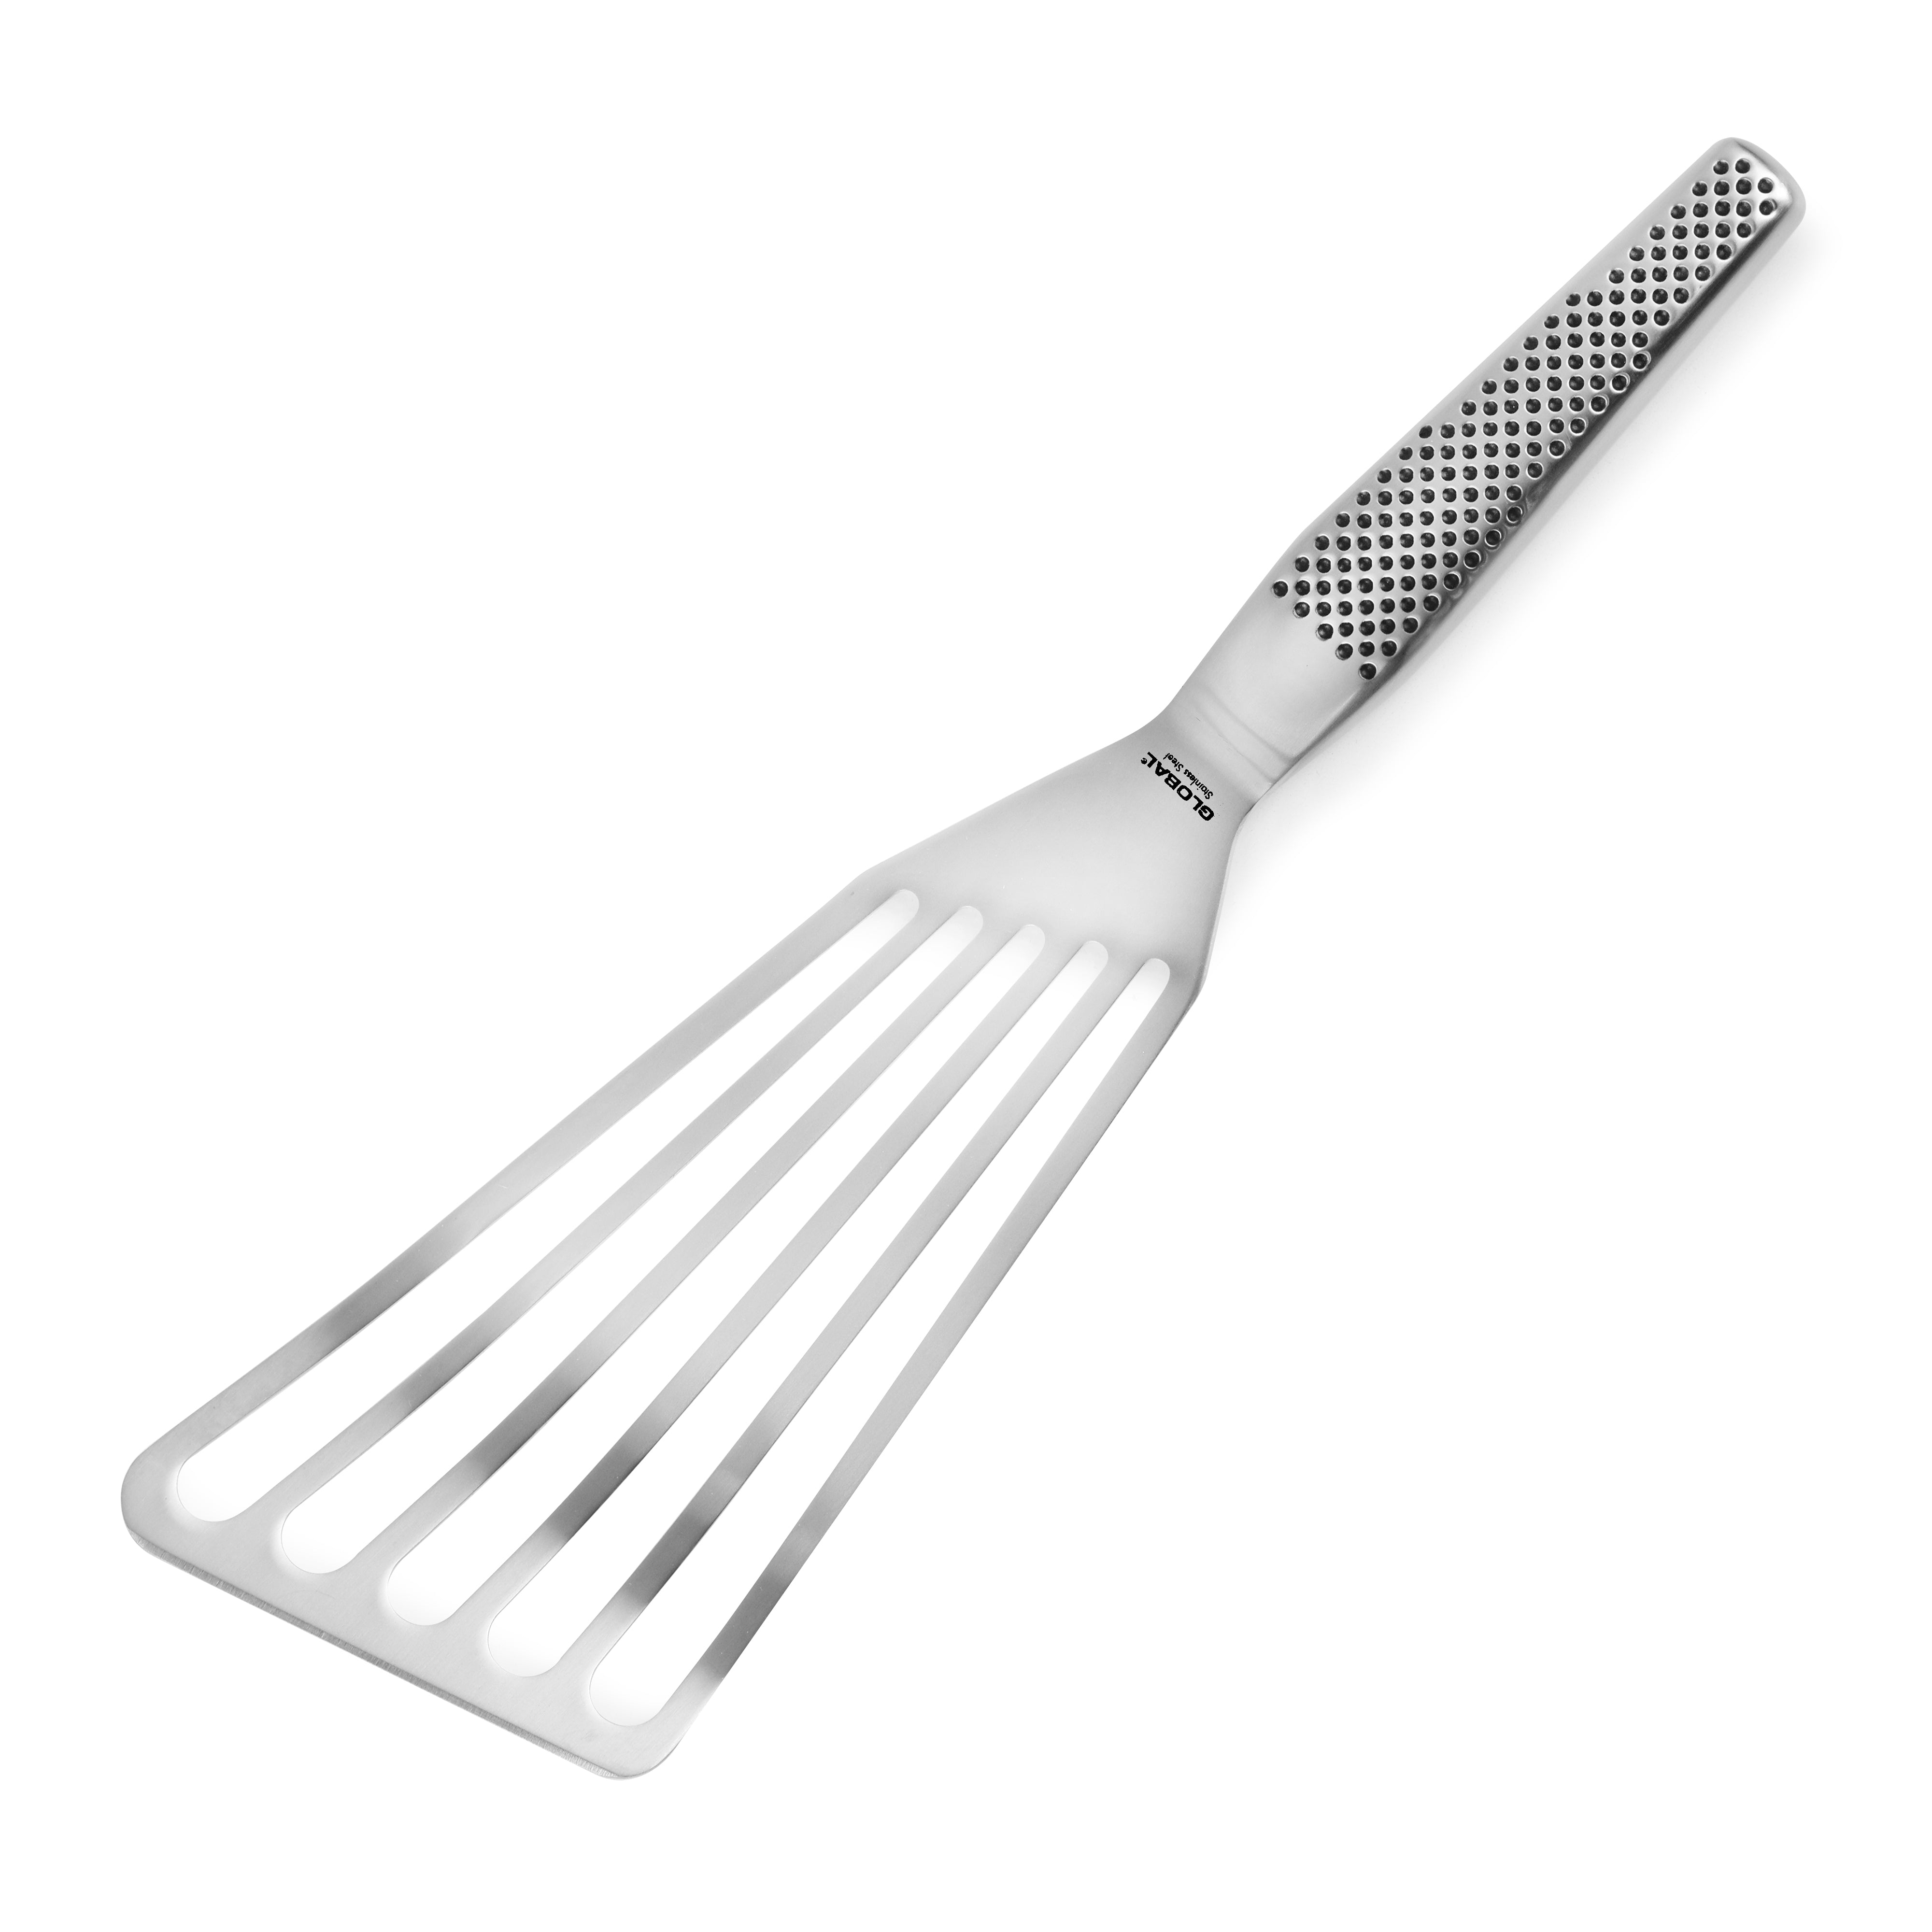 Fish Spatula - Stainless Steel Slotted Food Turner with Pakka Wood Handle -  Ideal Fish Flipper for Chefs